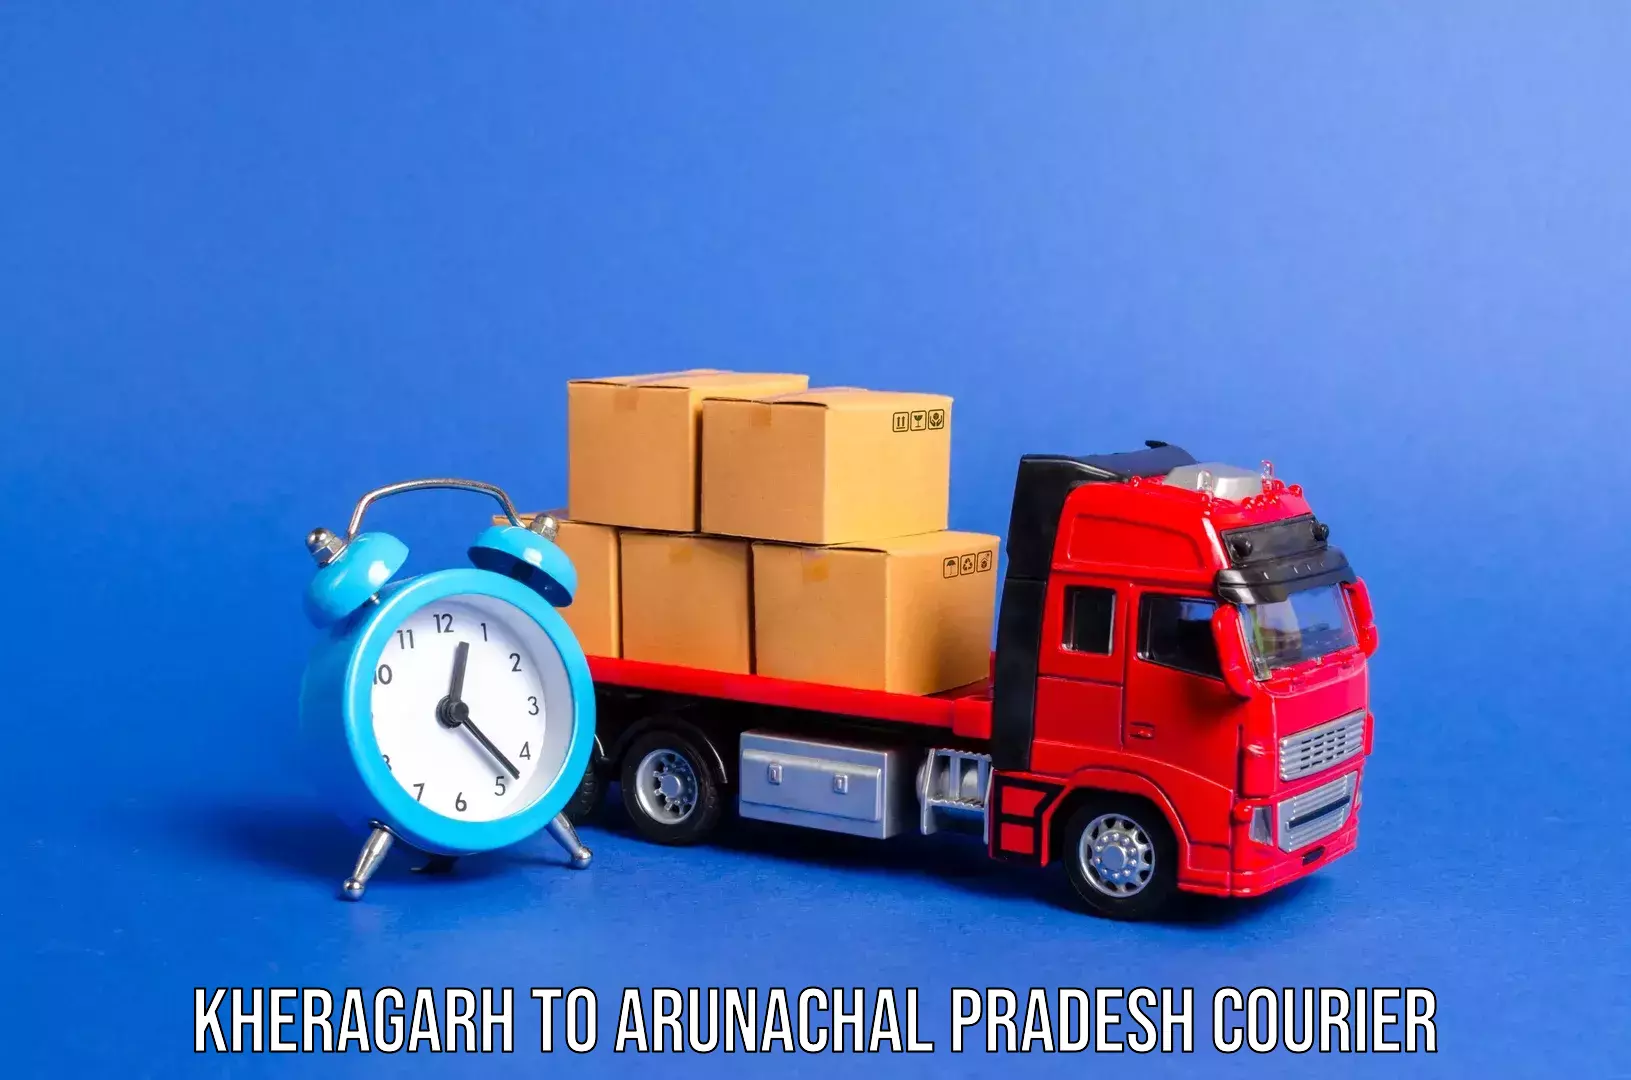 Luggage courier rates calculator Kheragarh to Deomali